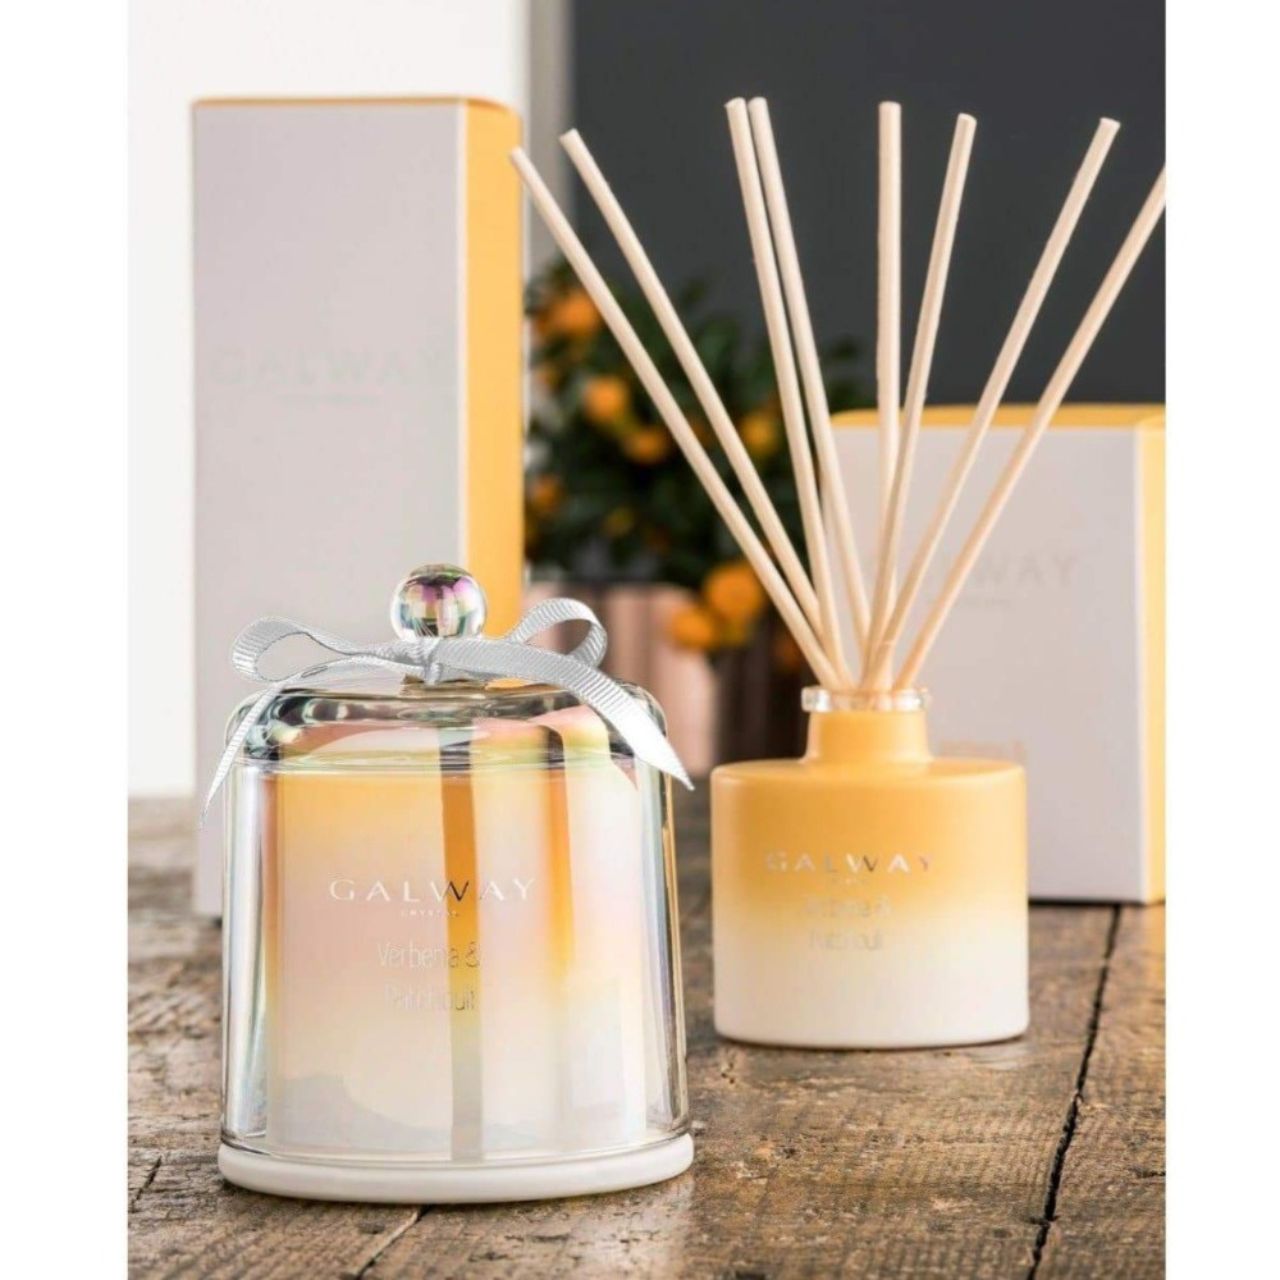 Verbena & Patchouli Diffuser by Galway Crystal  Transport yourself to a special place with the perfect fragrance for your home. Our Verbena & Patchouli scent will transform any room and will certainly set the right mood. Zesty citrus top notes of verbena & bergamot are paired with relaxing lavender.